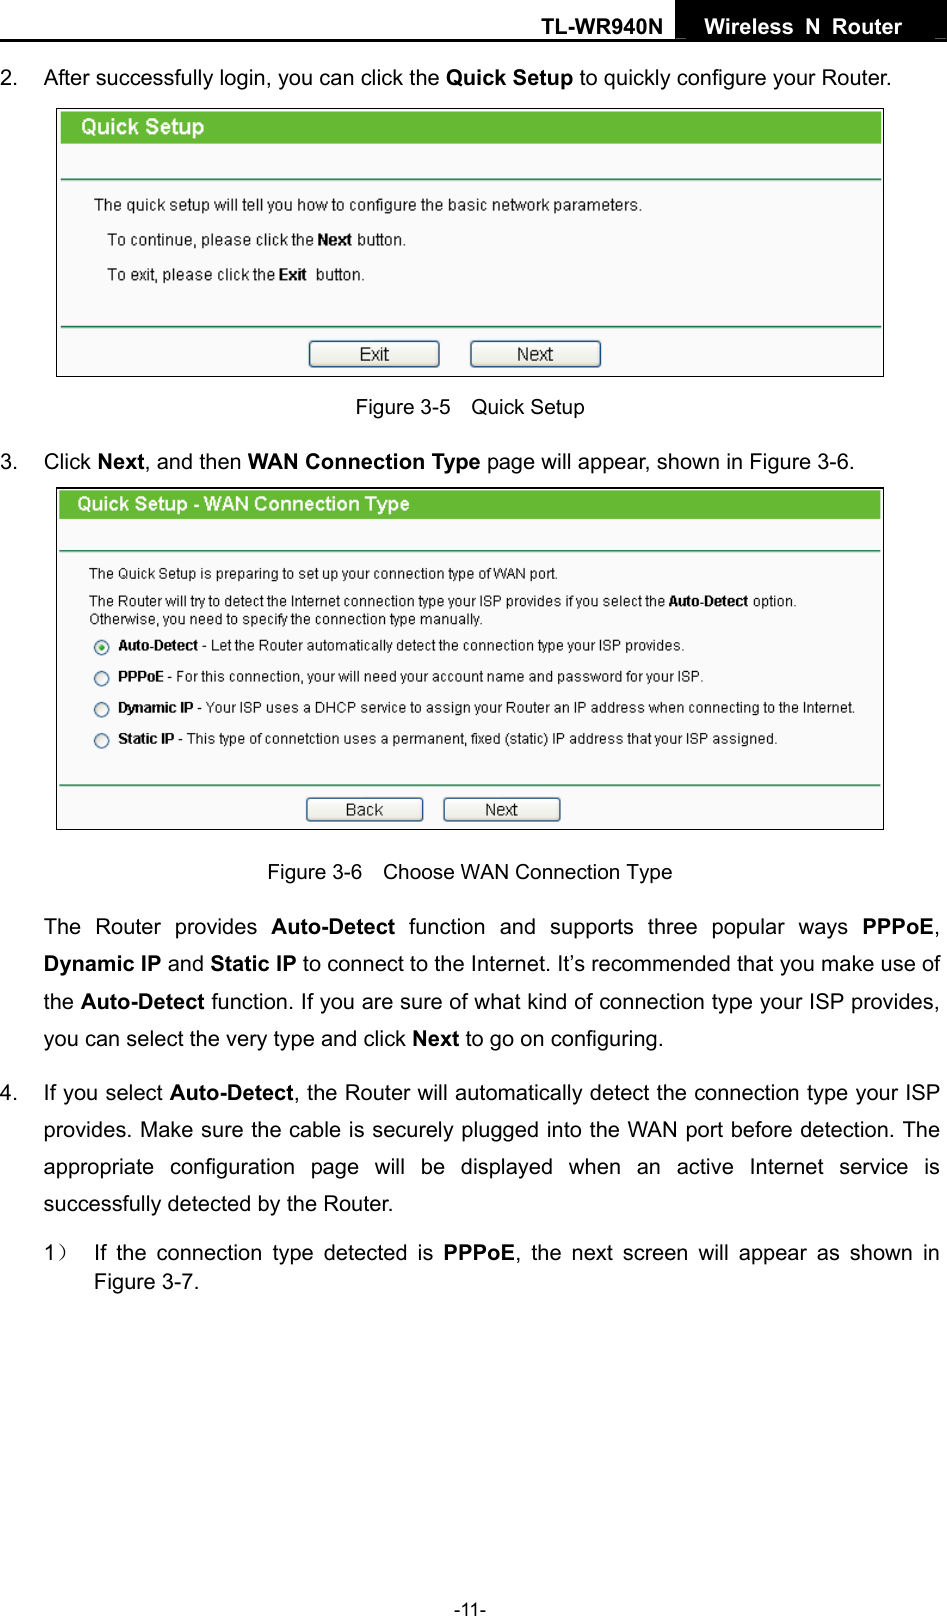 TL-WR940N  Wireless N Router   2.  After successfully login, you can click the Quick Setup to quickly configure your Router.    Figure 3-5    Quick Setup 3. Click Next, and then WAN Connection Type page will appear, shown in Figure 3-6.  Figure 3-6    Choose WAN Connection Type The Router provides Auto-Detect function and supports three popular ways PPPoE, Dynamic IP and Static IP to connect to the Internet. It’s recommended that you make use of the Auto-Detect function. If you are sure of what kind of connection type your ISP provides, you can select the very type and click Next to go on configuring. 4.  If you select Auto-Detect, the Router will automatically detect the connection type your ISP provides. Make sure the cable is securely plugged into the WAN port before detection. The appropriate configuration page will be displayed when an active Internet service is successfully detected by the Router. 1）  If the connection type detected is PPPoE, the next screen will appear as shown in Figure 3-7.  -11- 